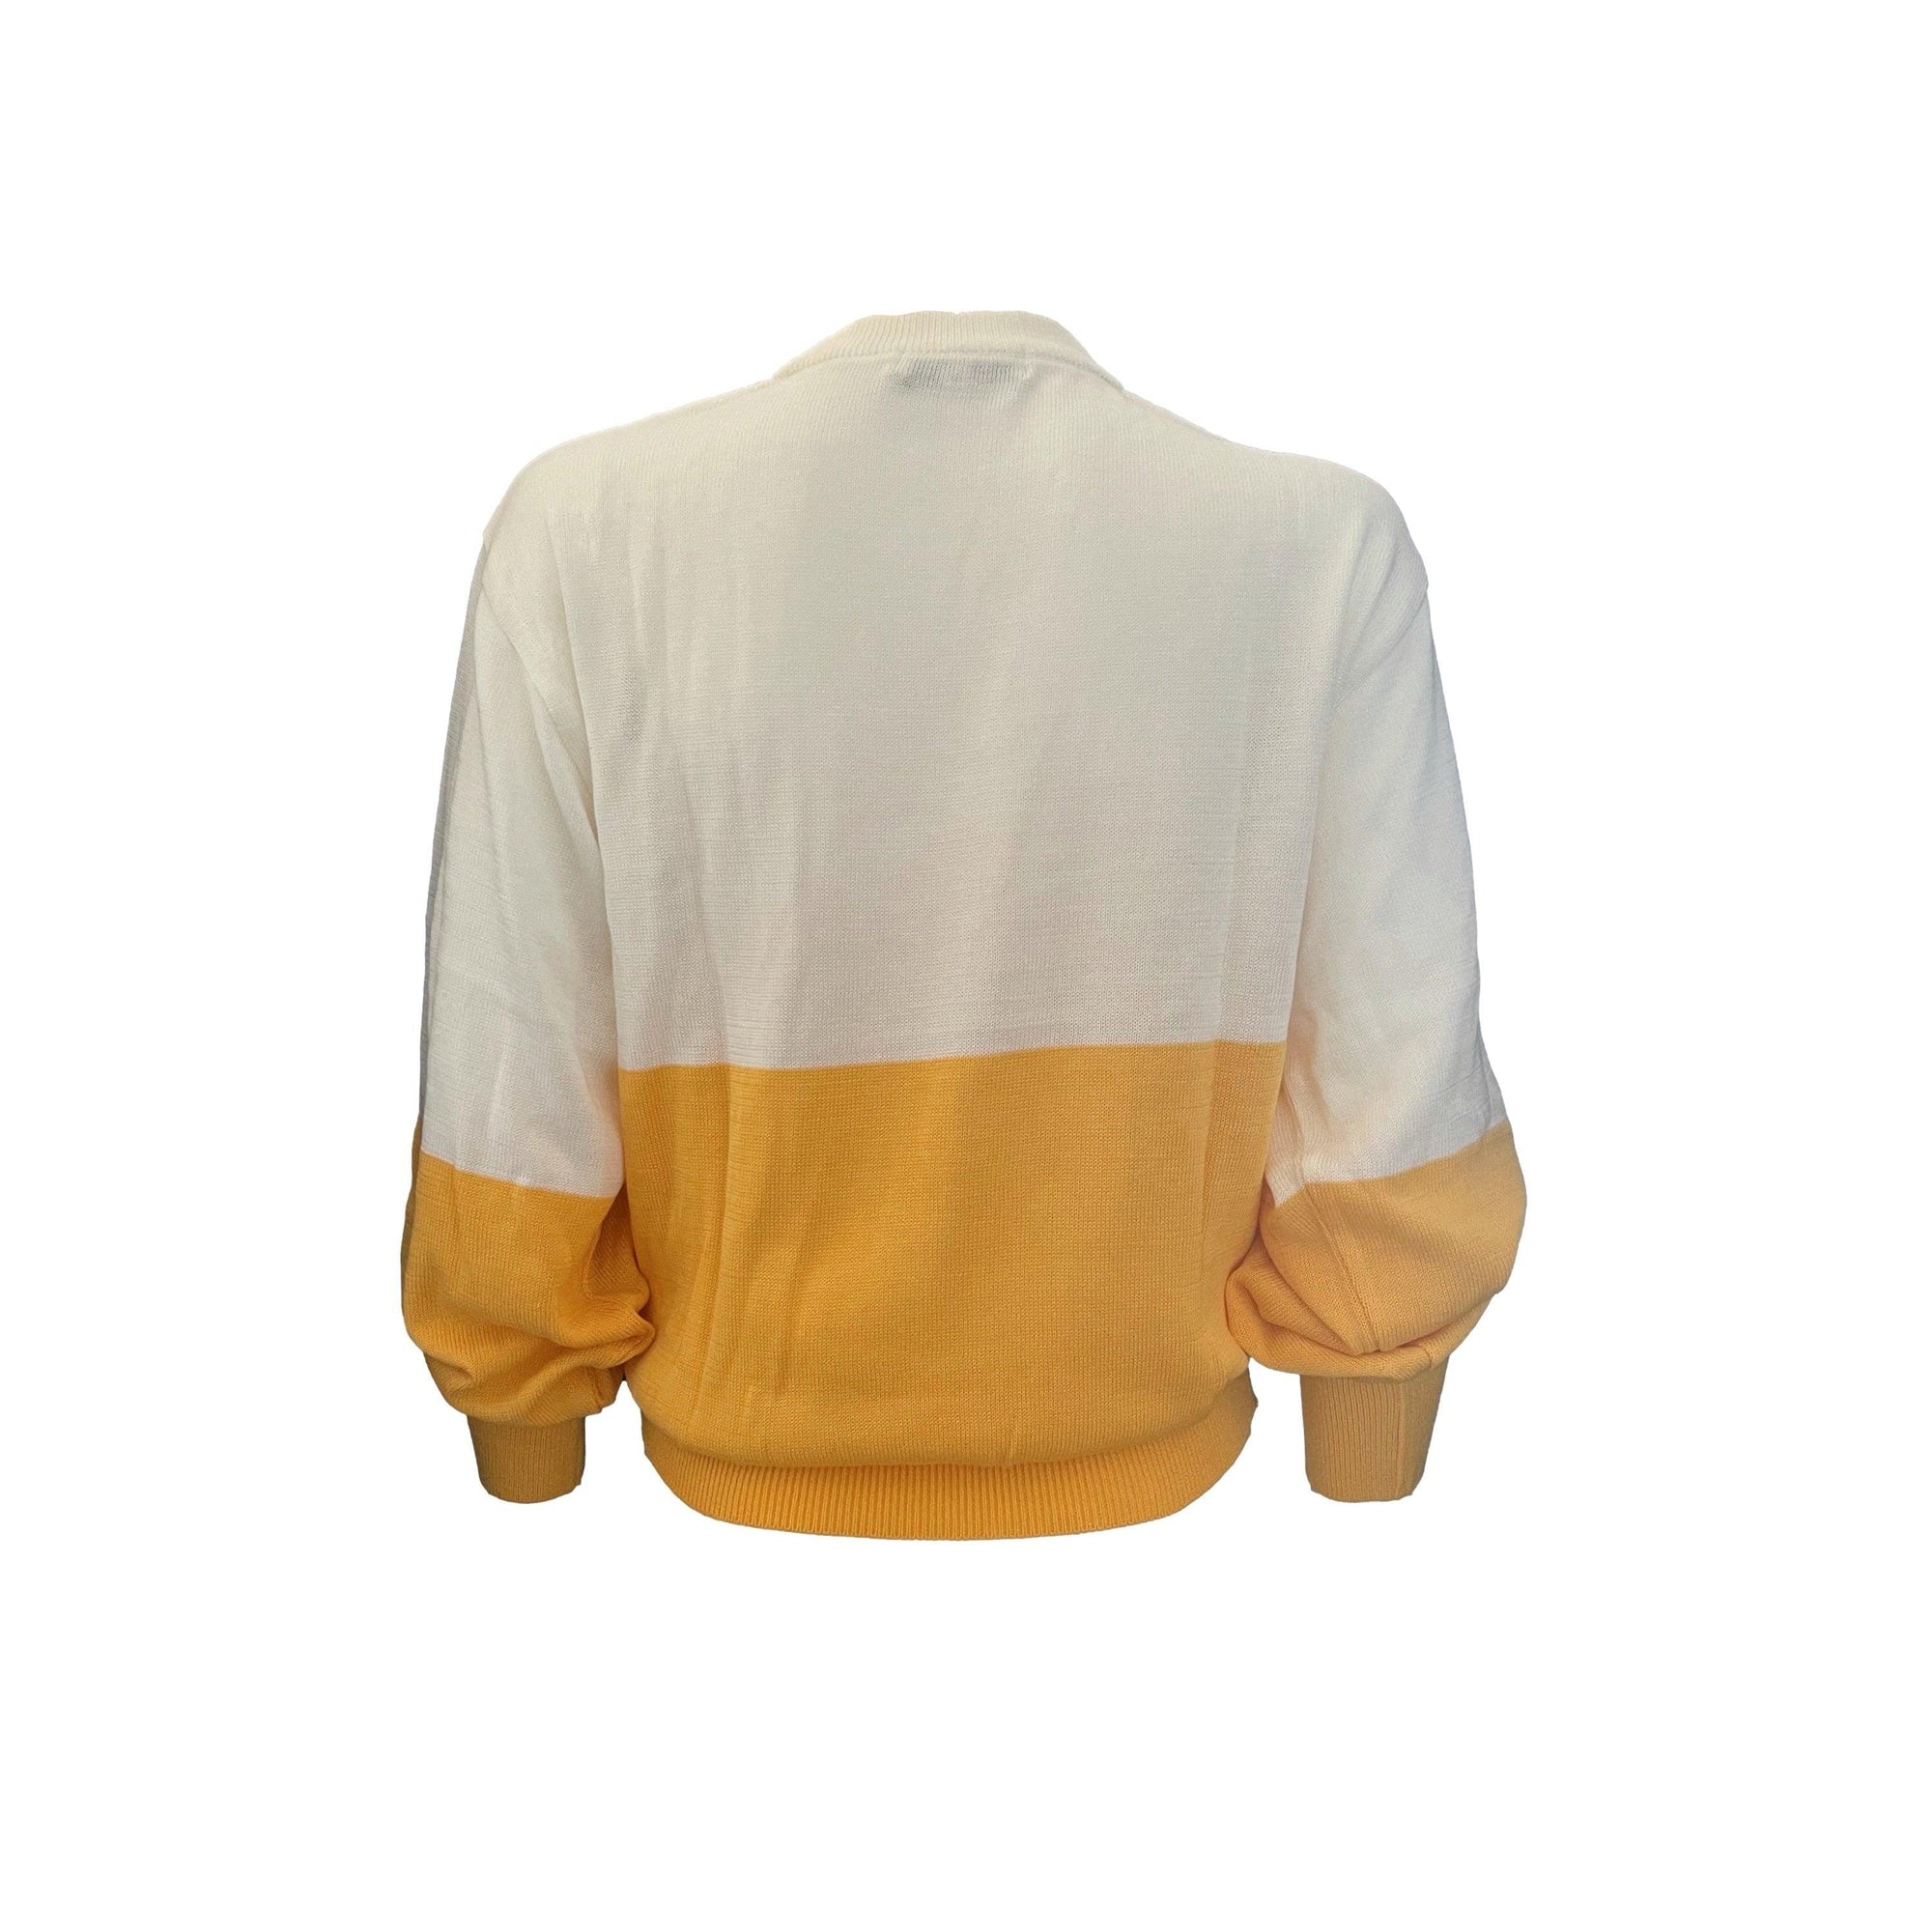 Dior Yellow Colorblock Knit Sweater - Apparel